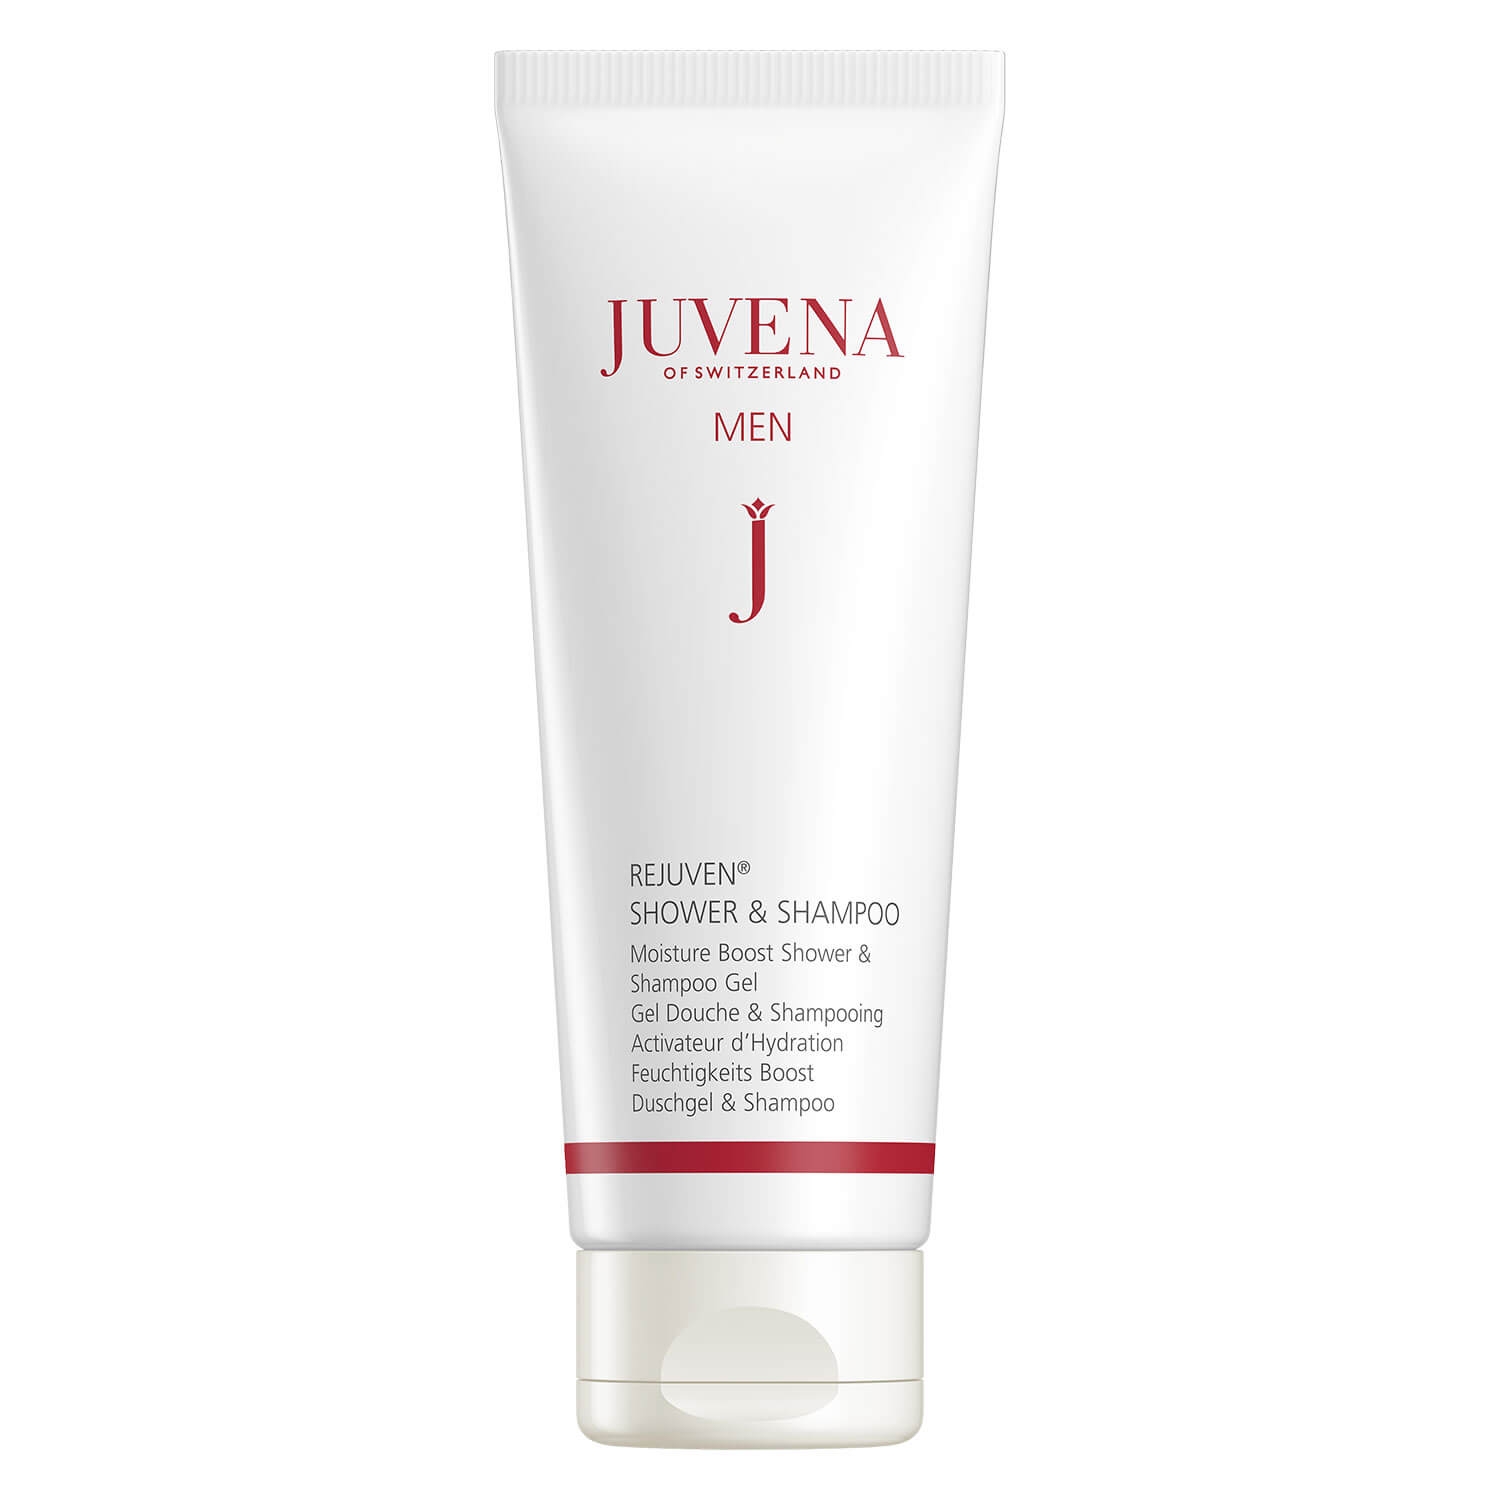 Product image from Rejuven - Moisture Boost Shower & Shampoo Gel